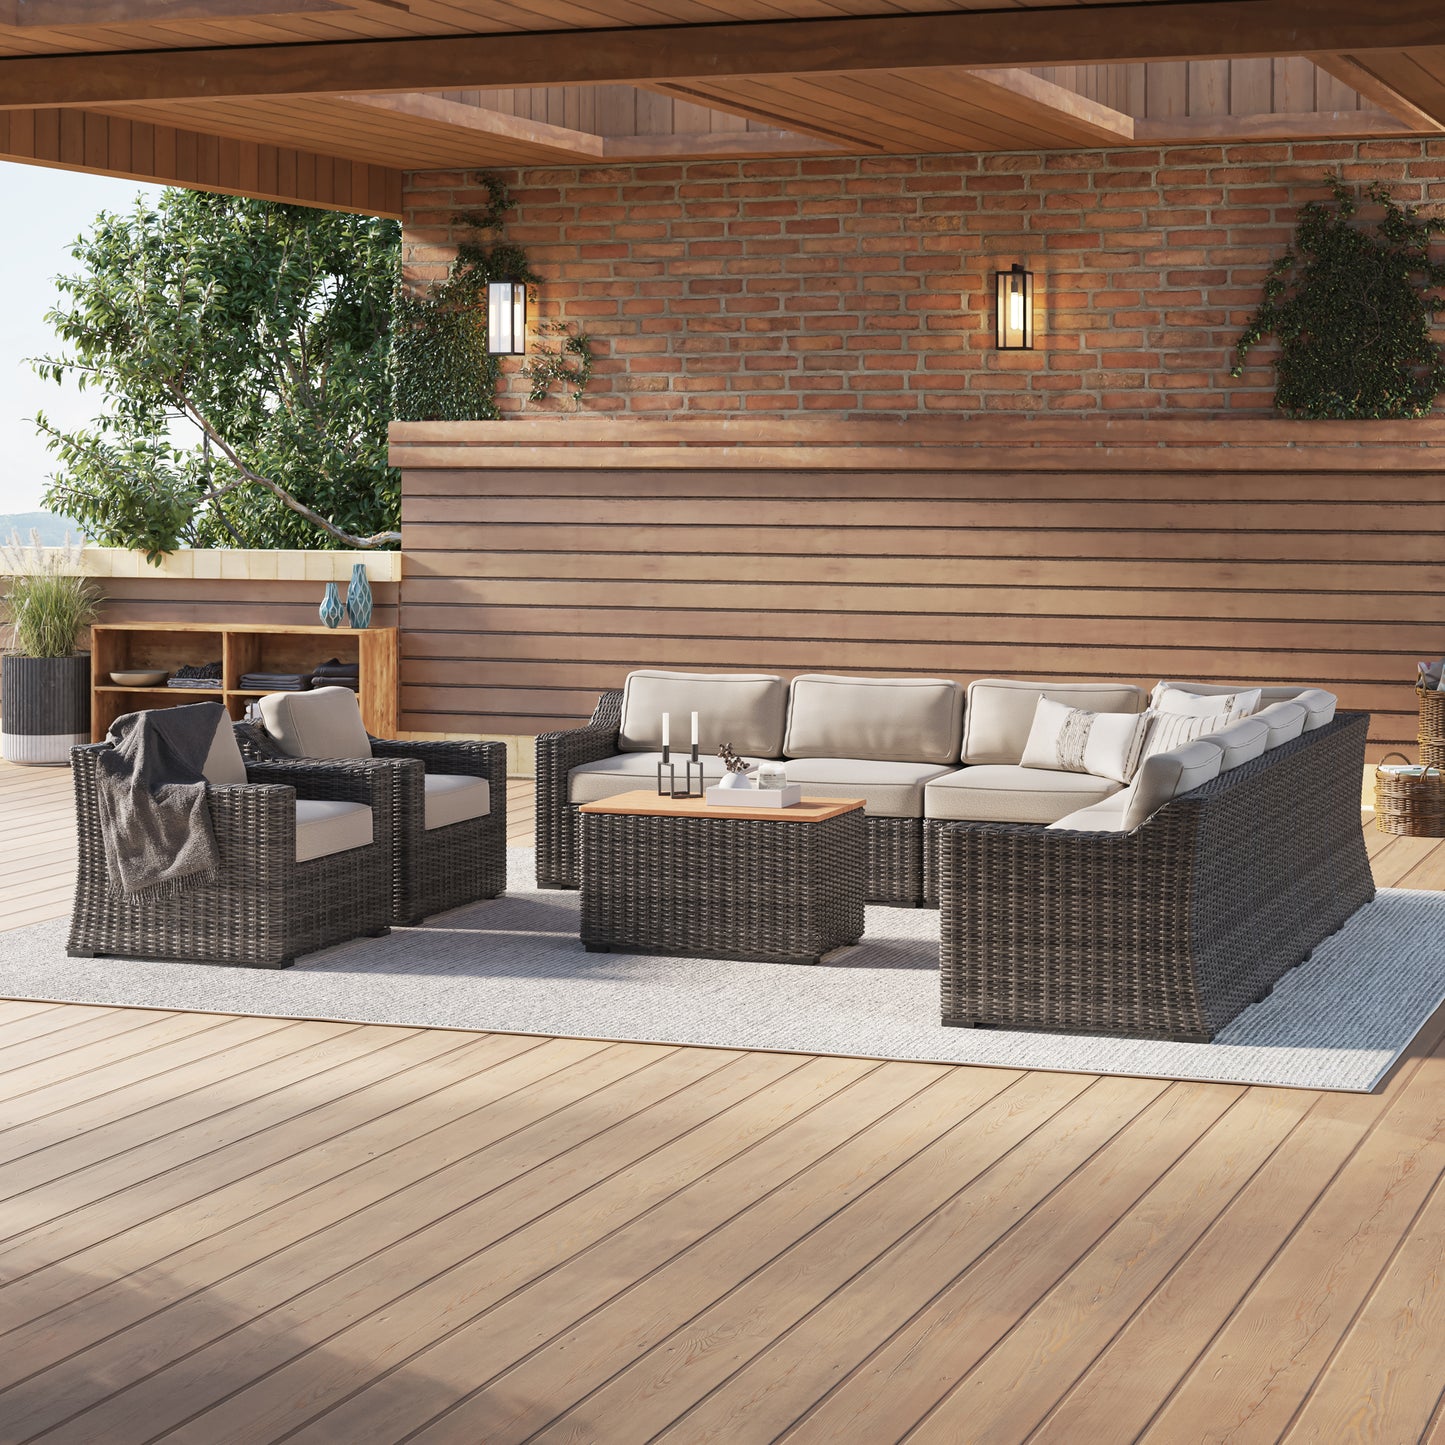 10 piece outdoor sectional from Villa Outdoors